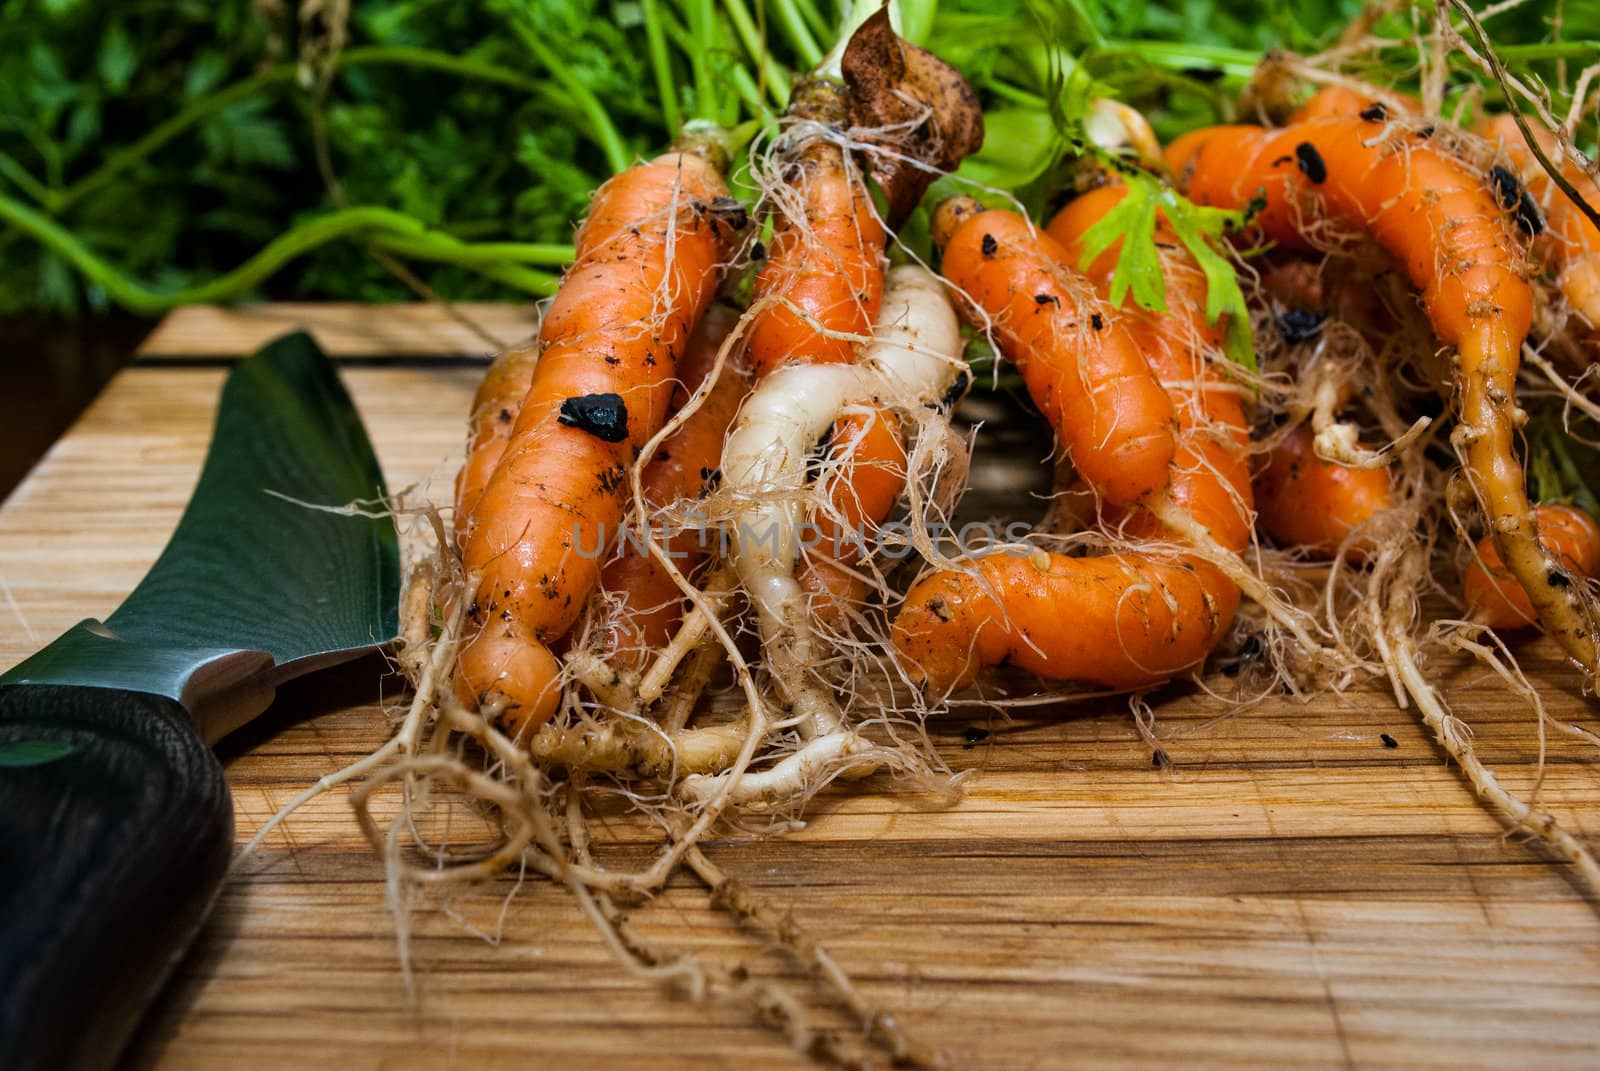 Photograph of Carrots Pulled from Garden by oliverjw